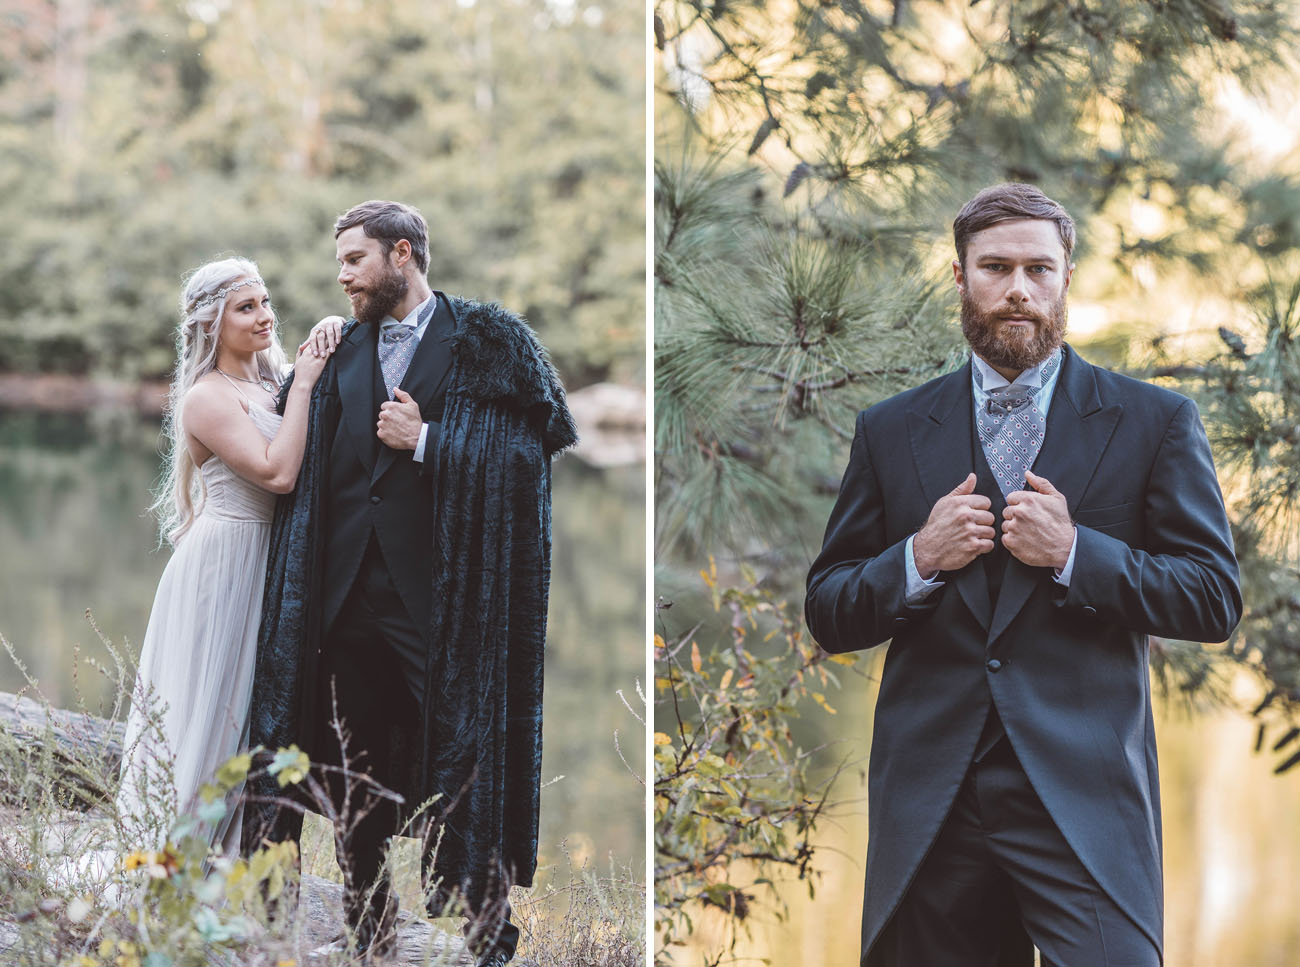 Game of Thrones Inspired Wedding